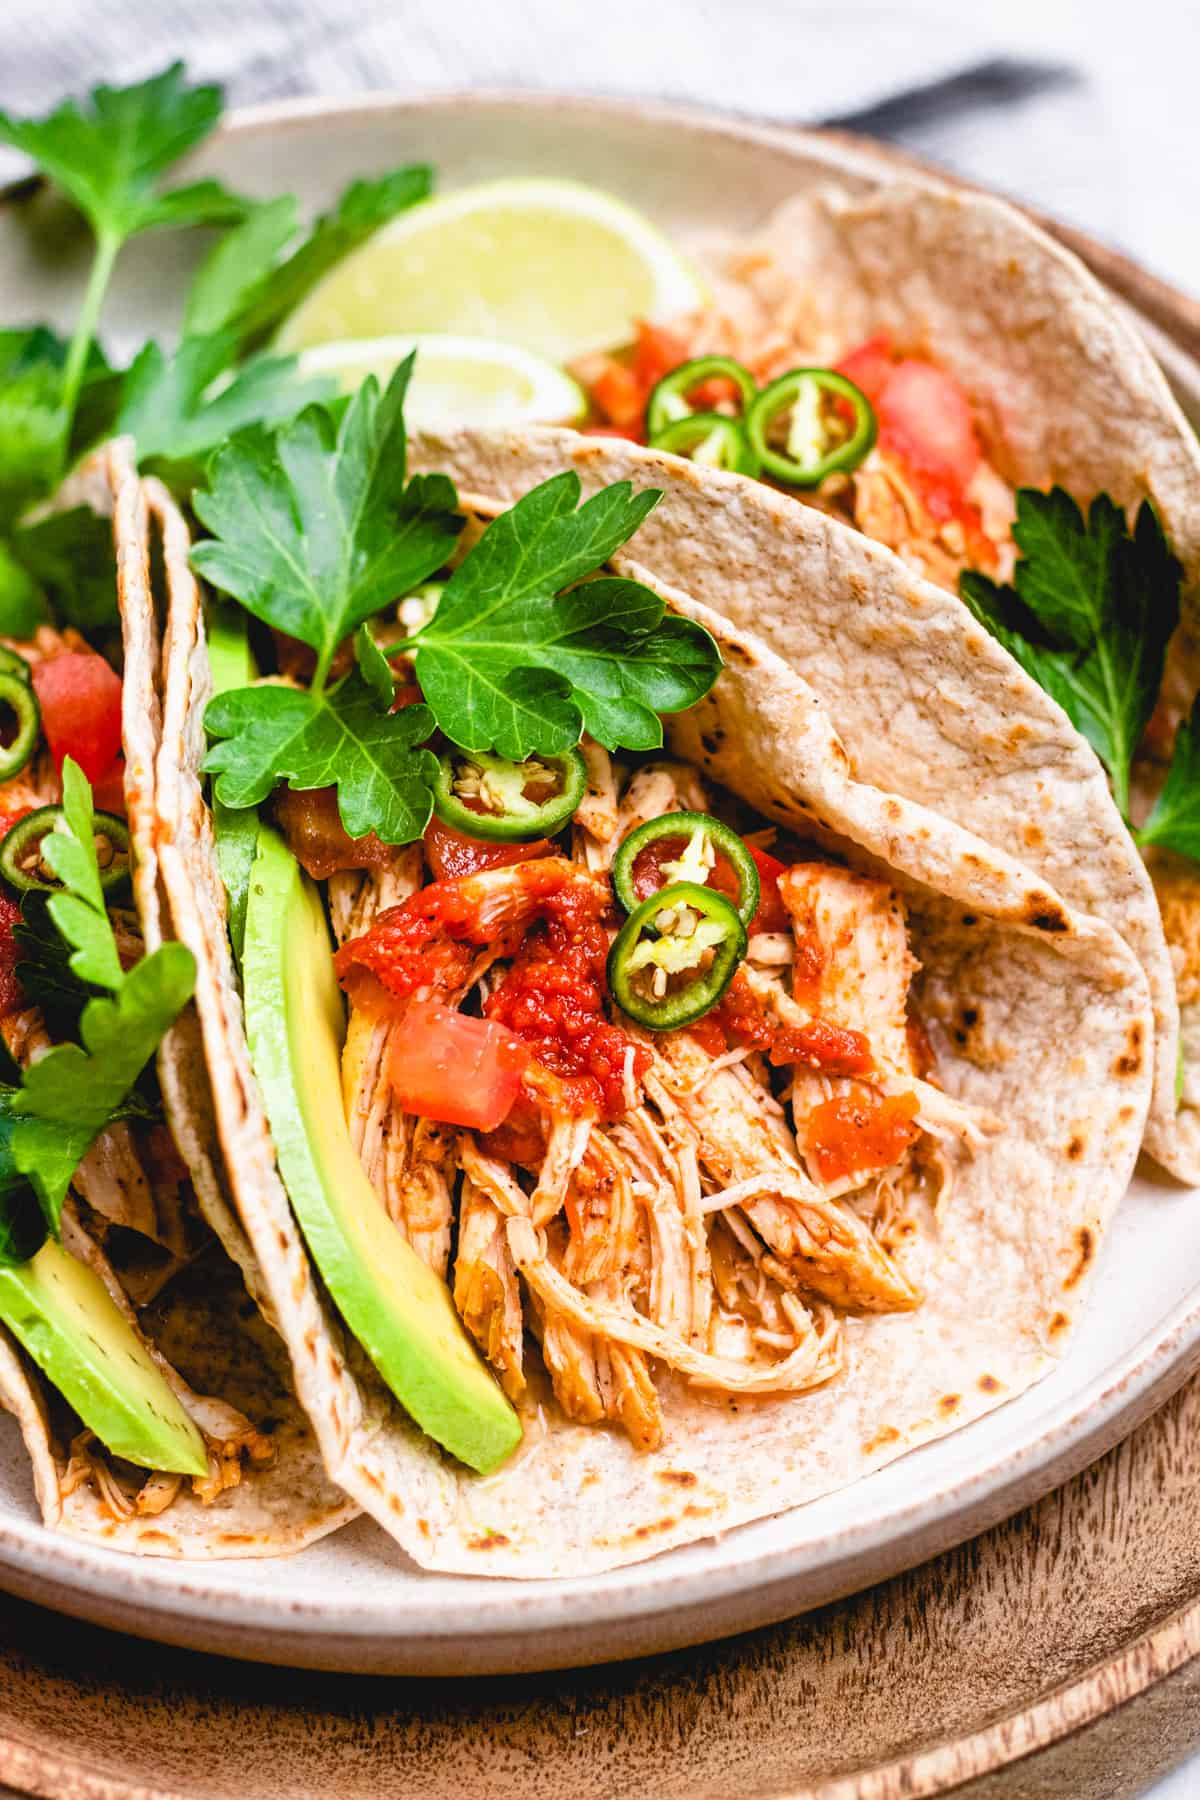 Tacos with shredded chicken, tomatoes, avocado, jalapeno, and cilantro on a plate.